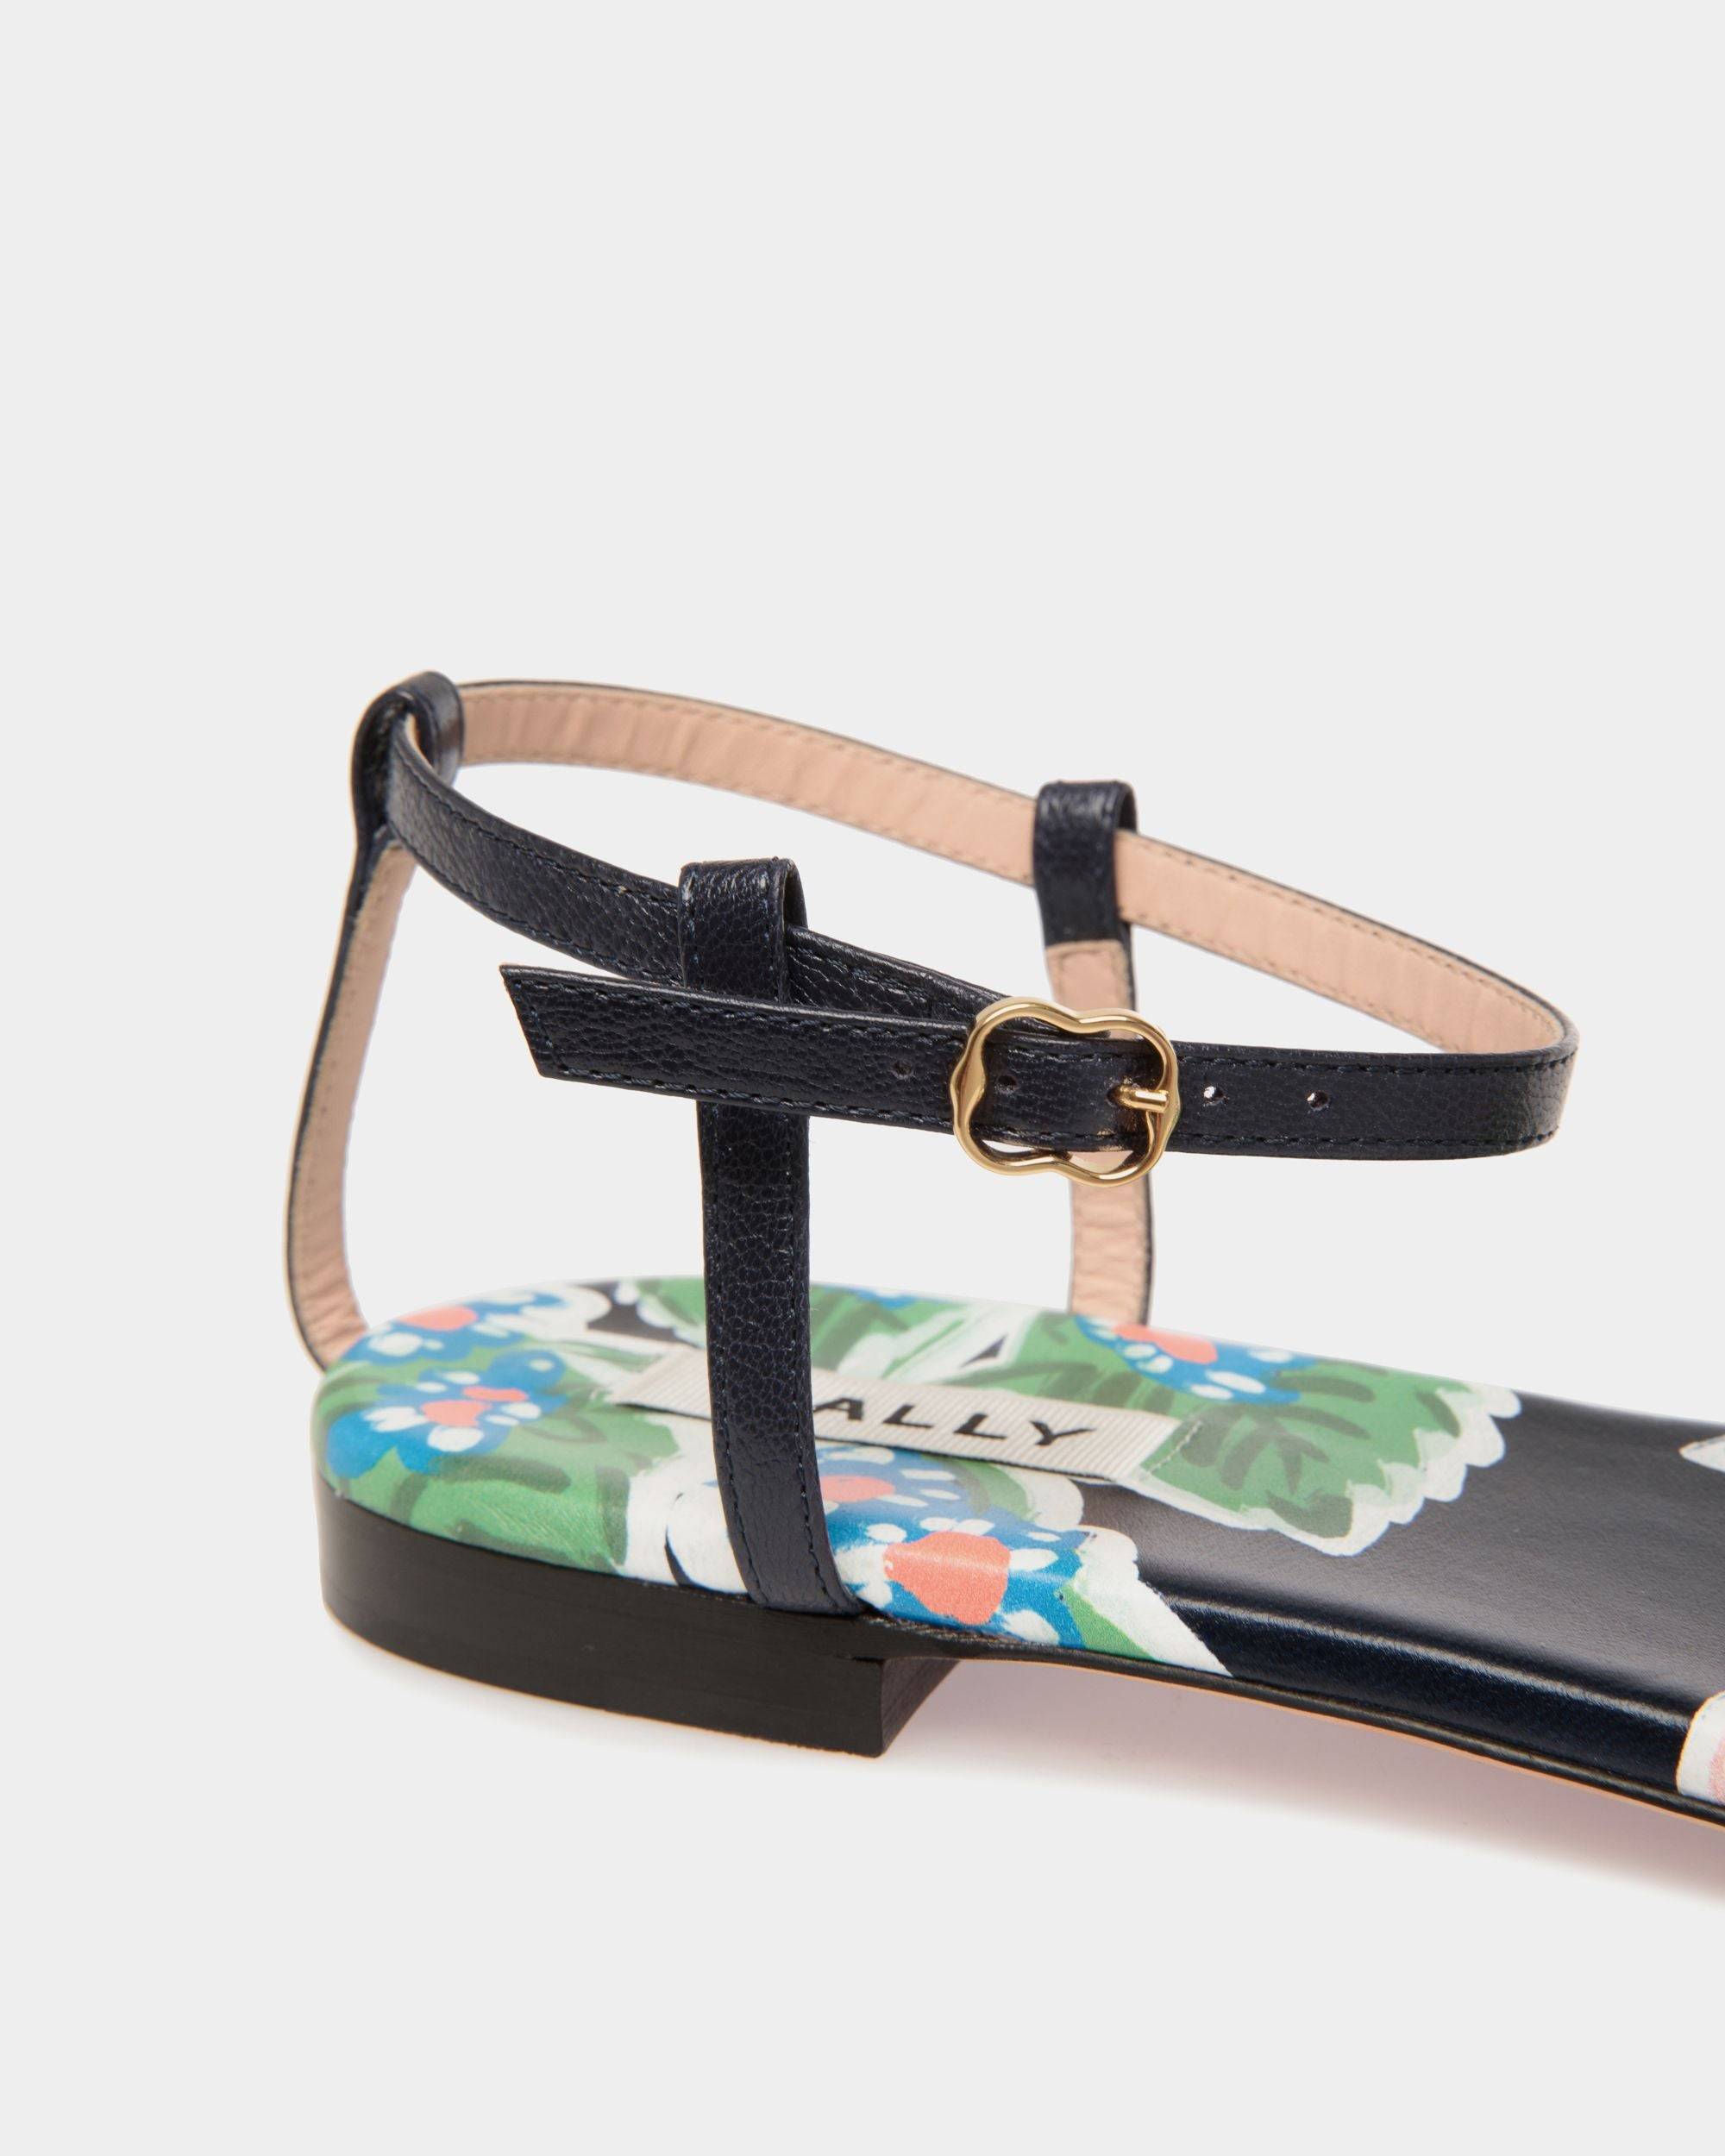 Katy | Women's Flat Sandal in Strawberry Print Brushed Leather | Bally | Still Life Detail